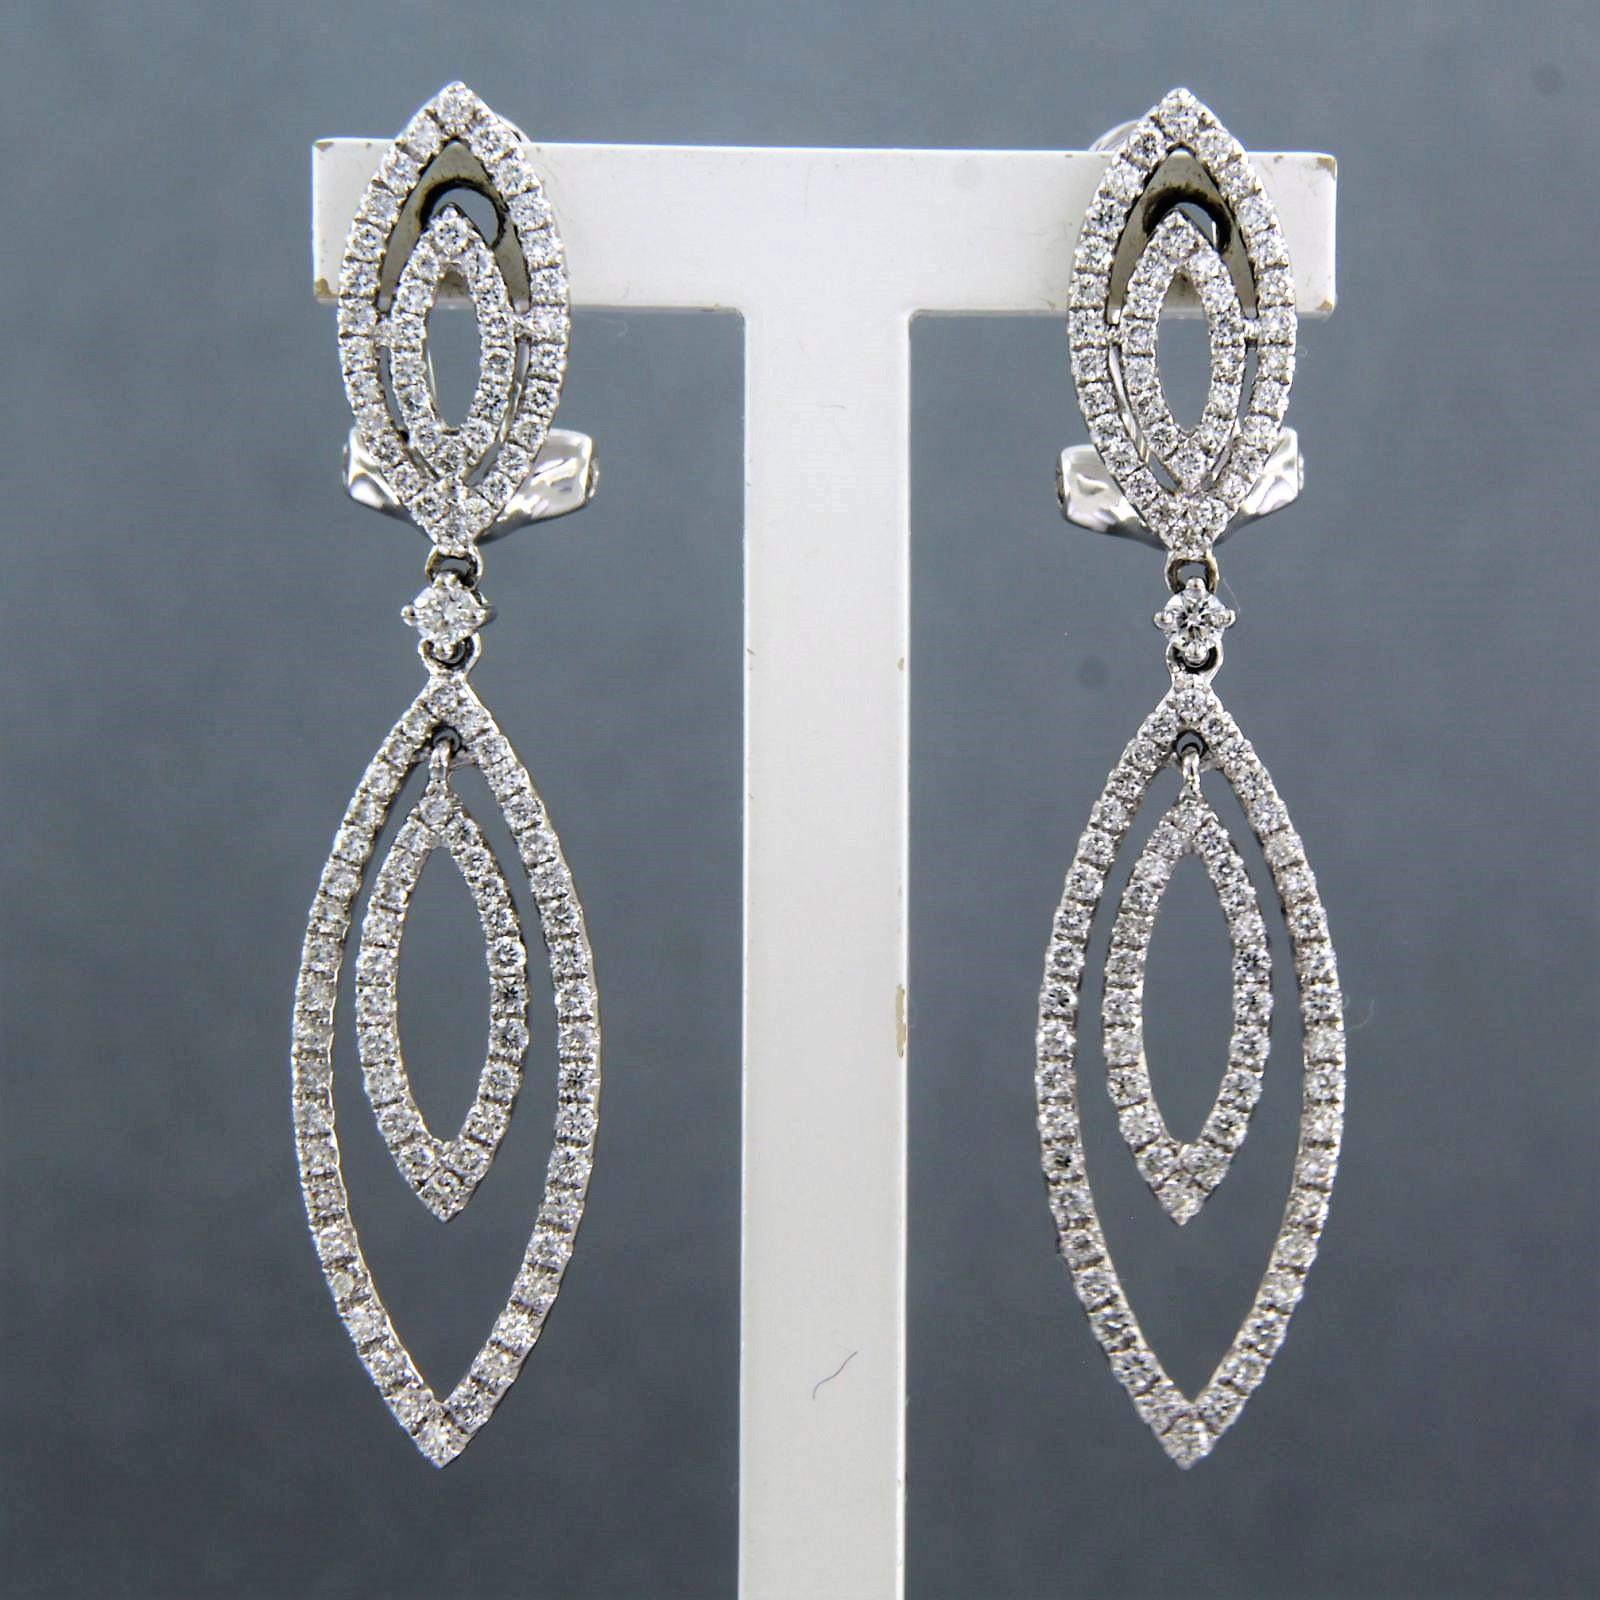 18k white gold earrings set with brilliant cut diamonds up to . 1.50ct - F/G - VS/SI

Detailed description:

The front of the earring is 4.0 cm long by 9.2 mm wide

weight 6.6 grams

occupied with

- 210 x 1.1 mm - 1.7 mm brilliant cut diamond,